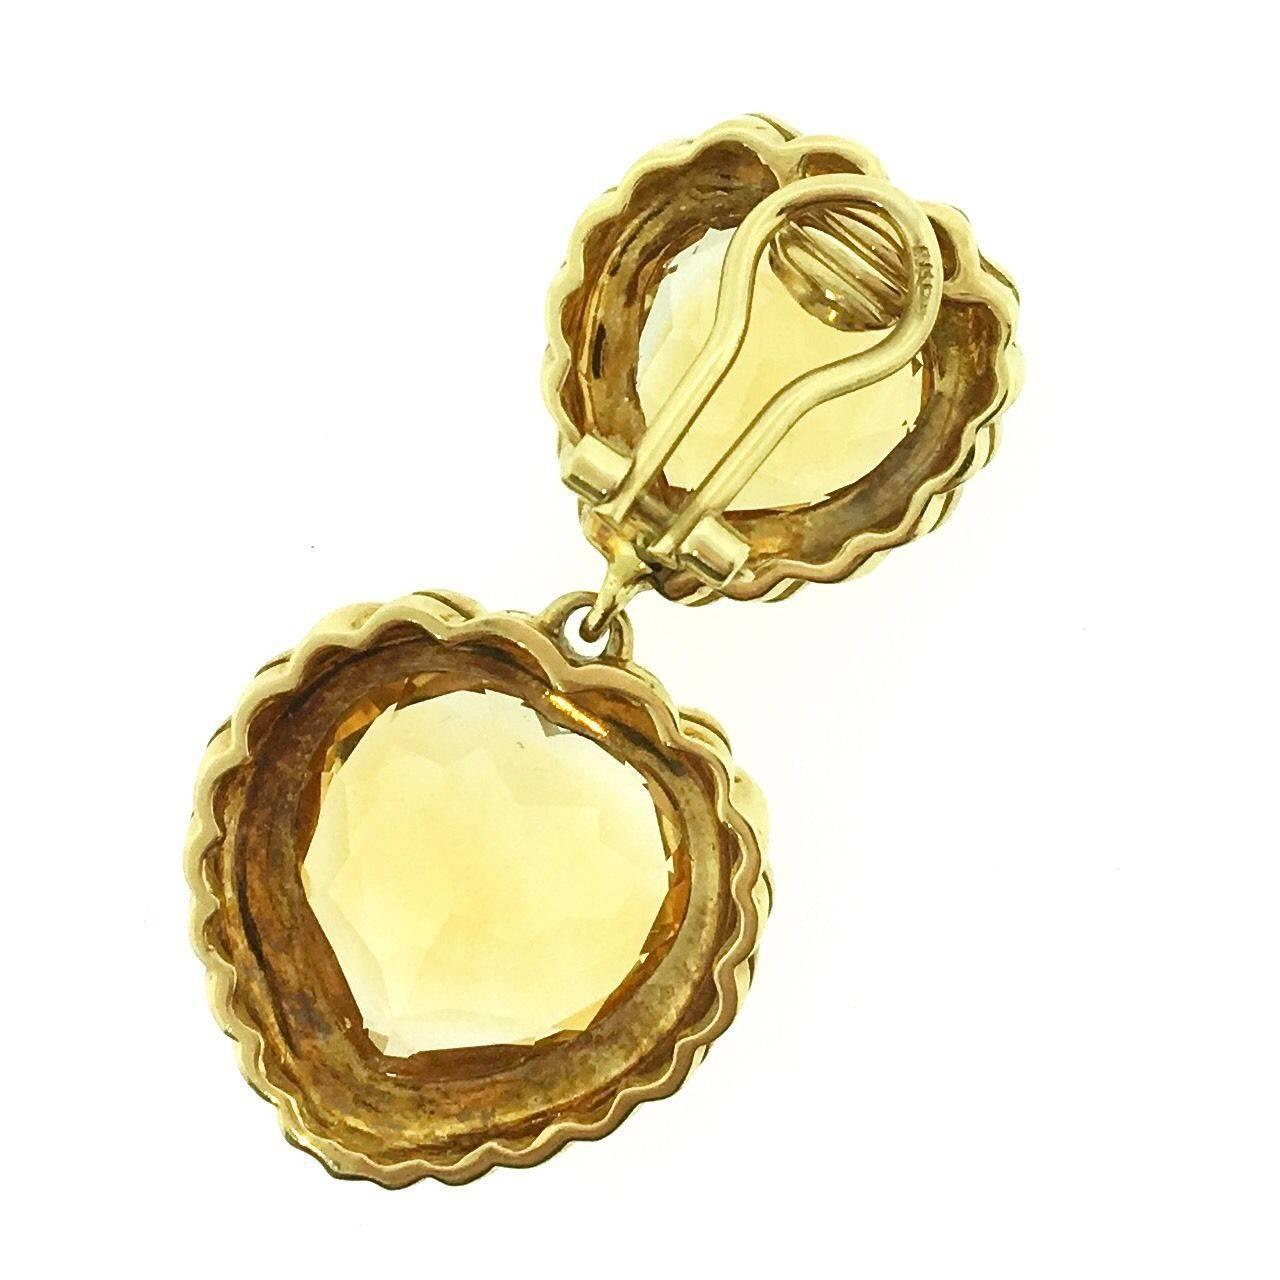 Large Heart Citrine Dangle Earrings by Fred. Earrings feature four large Heart-shaped Citrines bezel set, one over the other, with high polish twist edging in 18k Yellow Gold. Top Citrines weigh approximately 7.00 ct each, bottom Citrines weigh